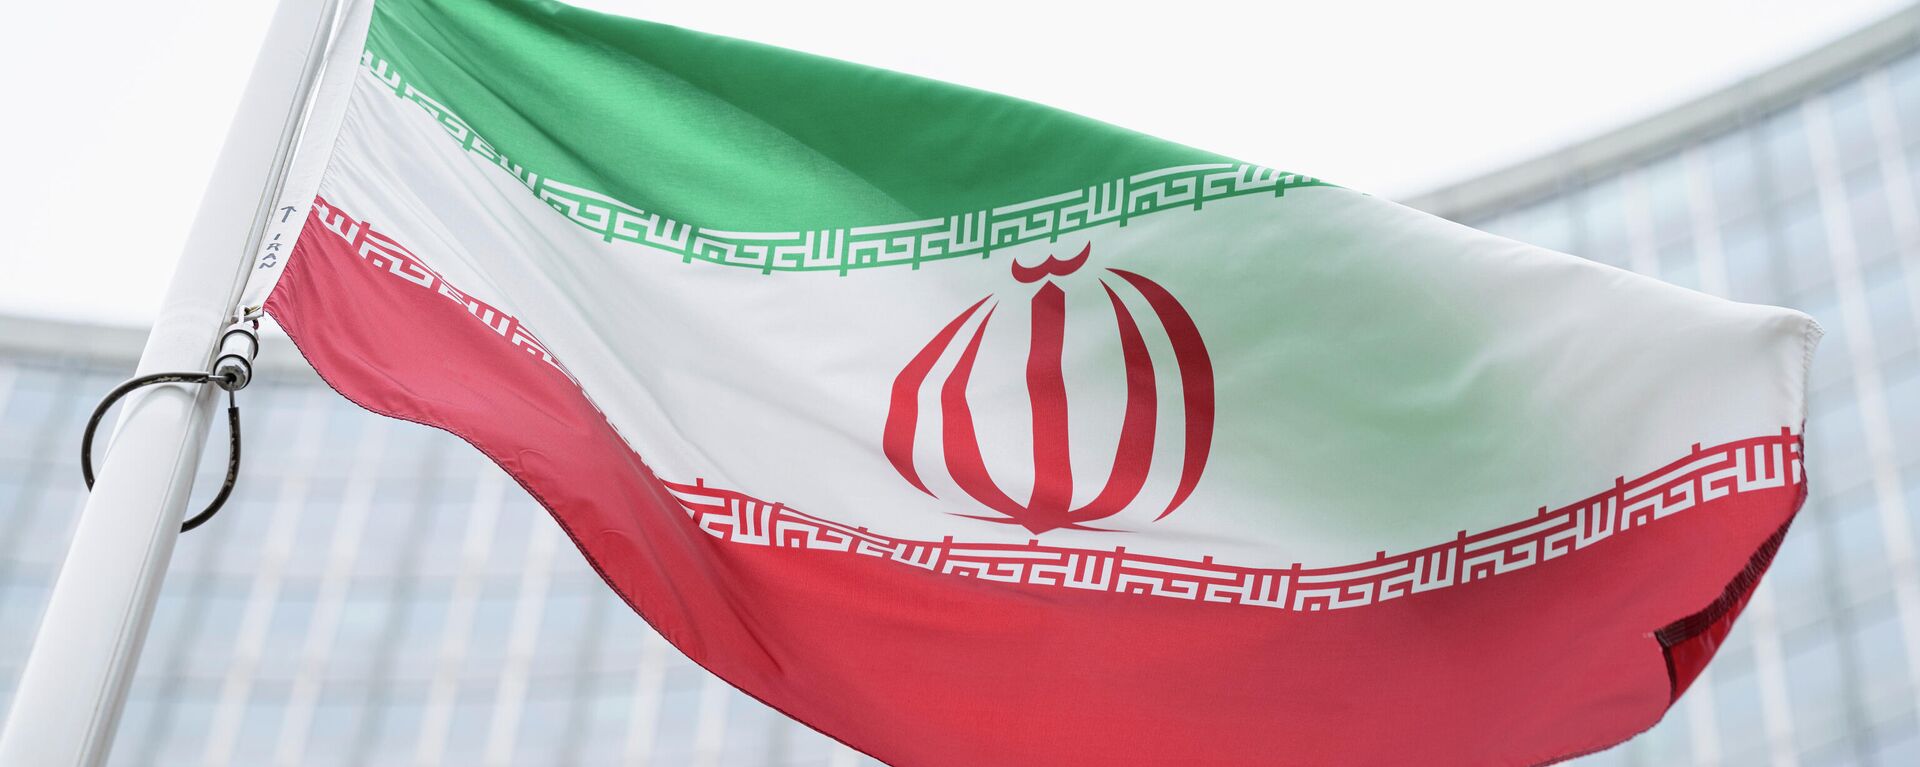 FILE - The flag of Iran waves in front of the the International Center building with the headquarters of the International Atomic Energy Agency, IAEA, in Vienna, AustriaI, May 24, 2021. On Monday, Nov. 29, 2021, negotiators are gathering in Vienna to resume efforts to revive Iran's 2015 nuclear deal with world powers, with hopes of quick progress muted after the arrival of a hard-line new government in Tehran led to a more than five-month hiatus. (AP Photo/Florian Schroetter, FILE) - Sputnik International, 1920, 19.08.2022